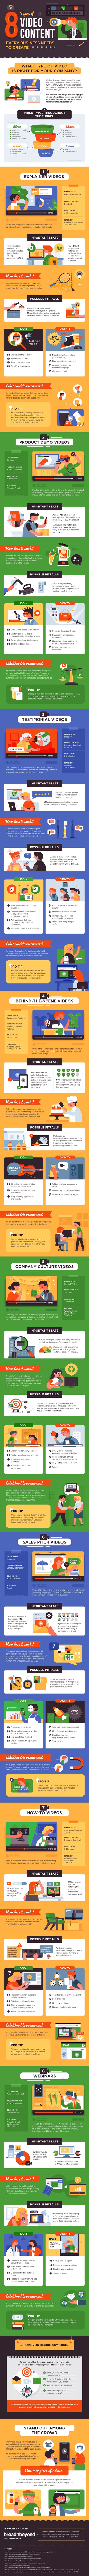 8_types_of_video_content2